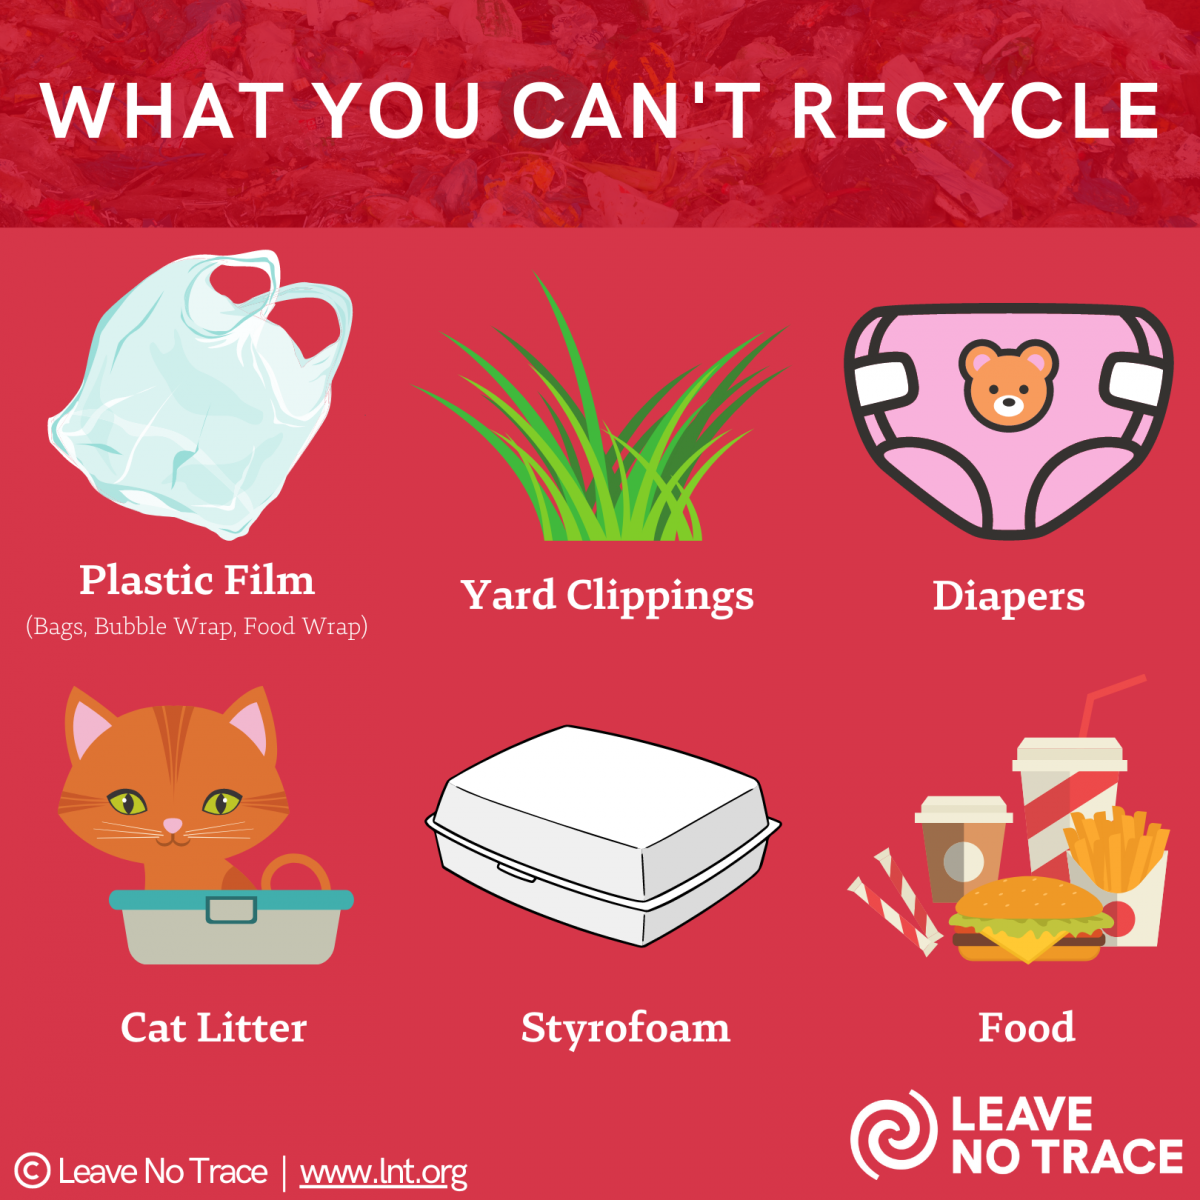 What You Can't Recycle